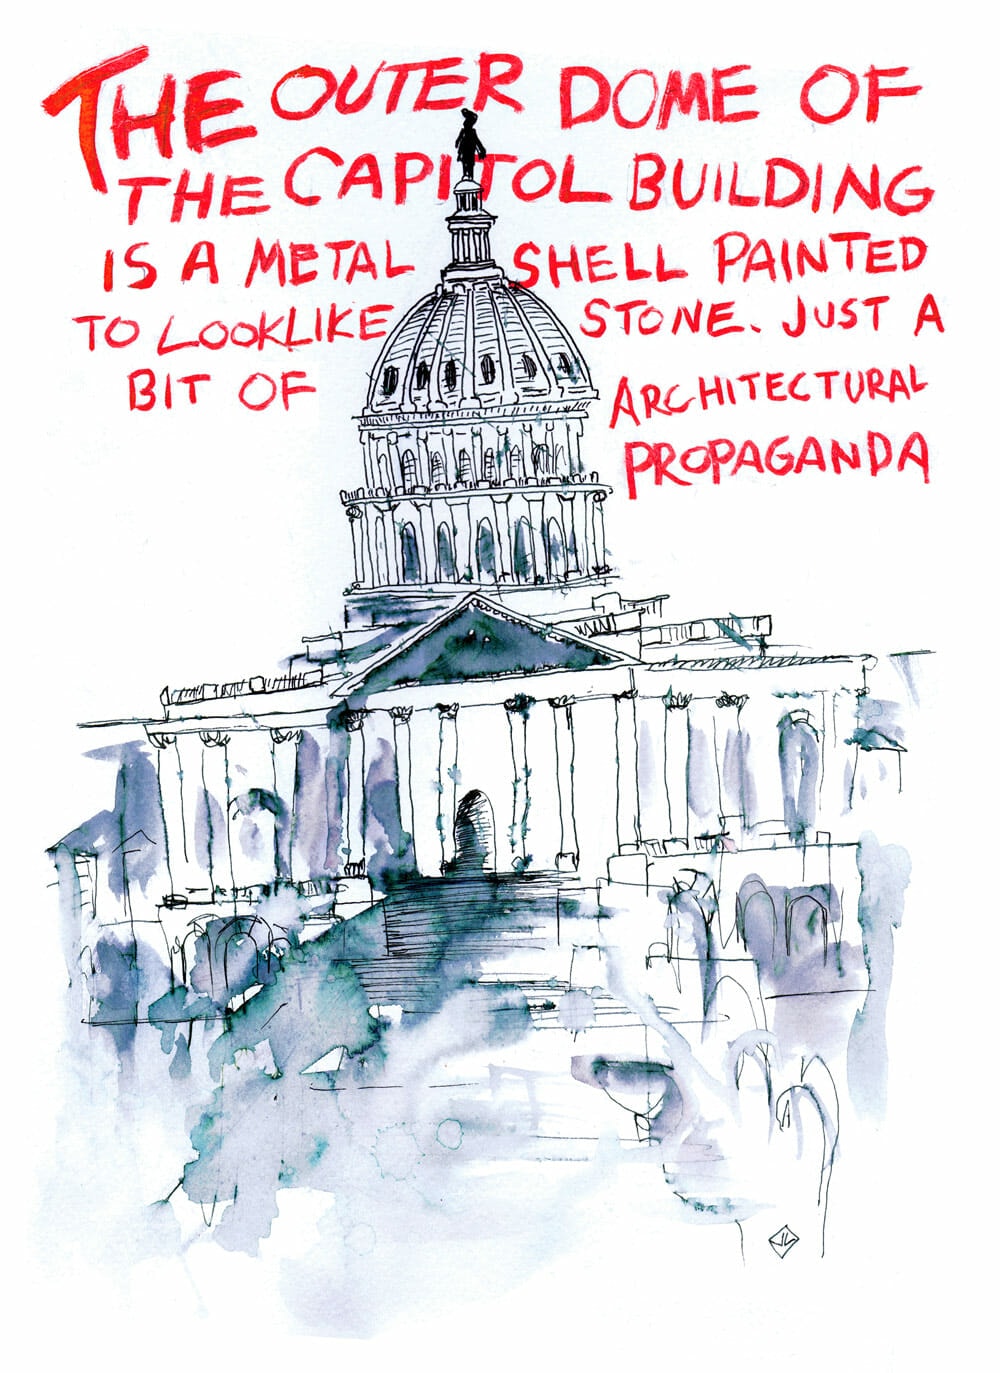 Over a watercolor painting of the U.S. Capitol, the text: 